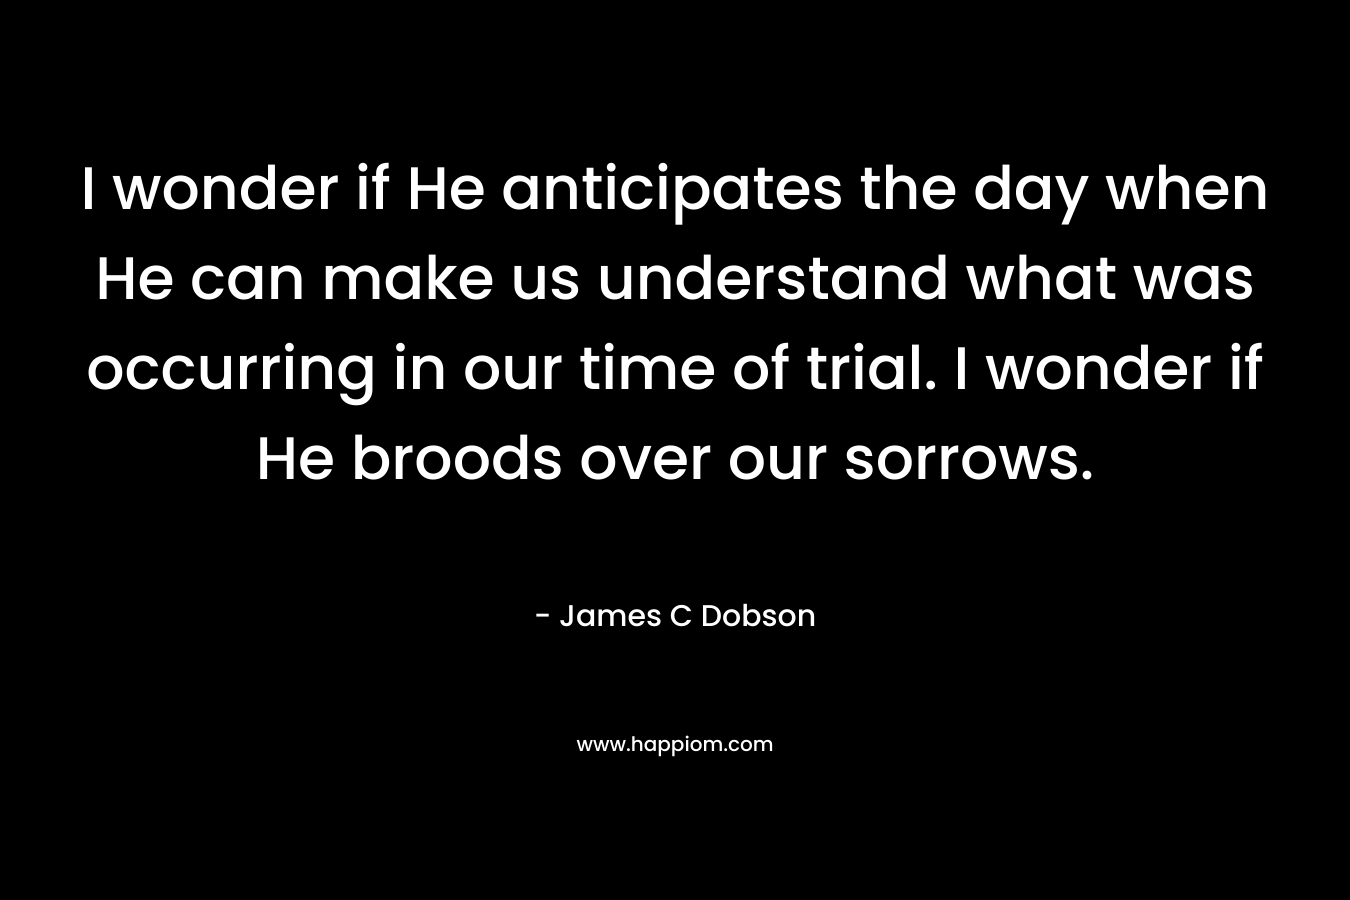 I wonder if He anticipates the day when He can make us understand what was occurring in our time of trial. I wonder if He broods over our sorrows. – James C Dobson